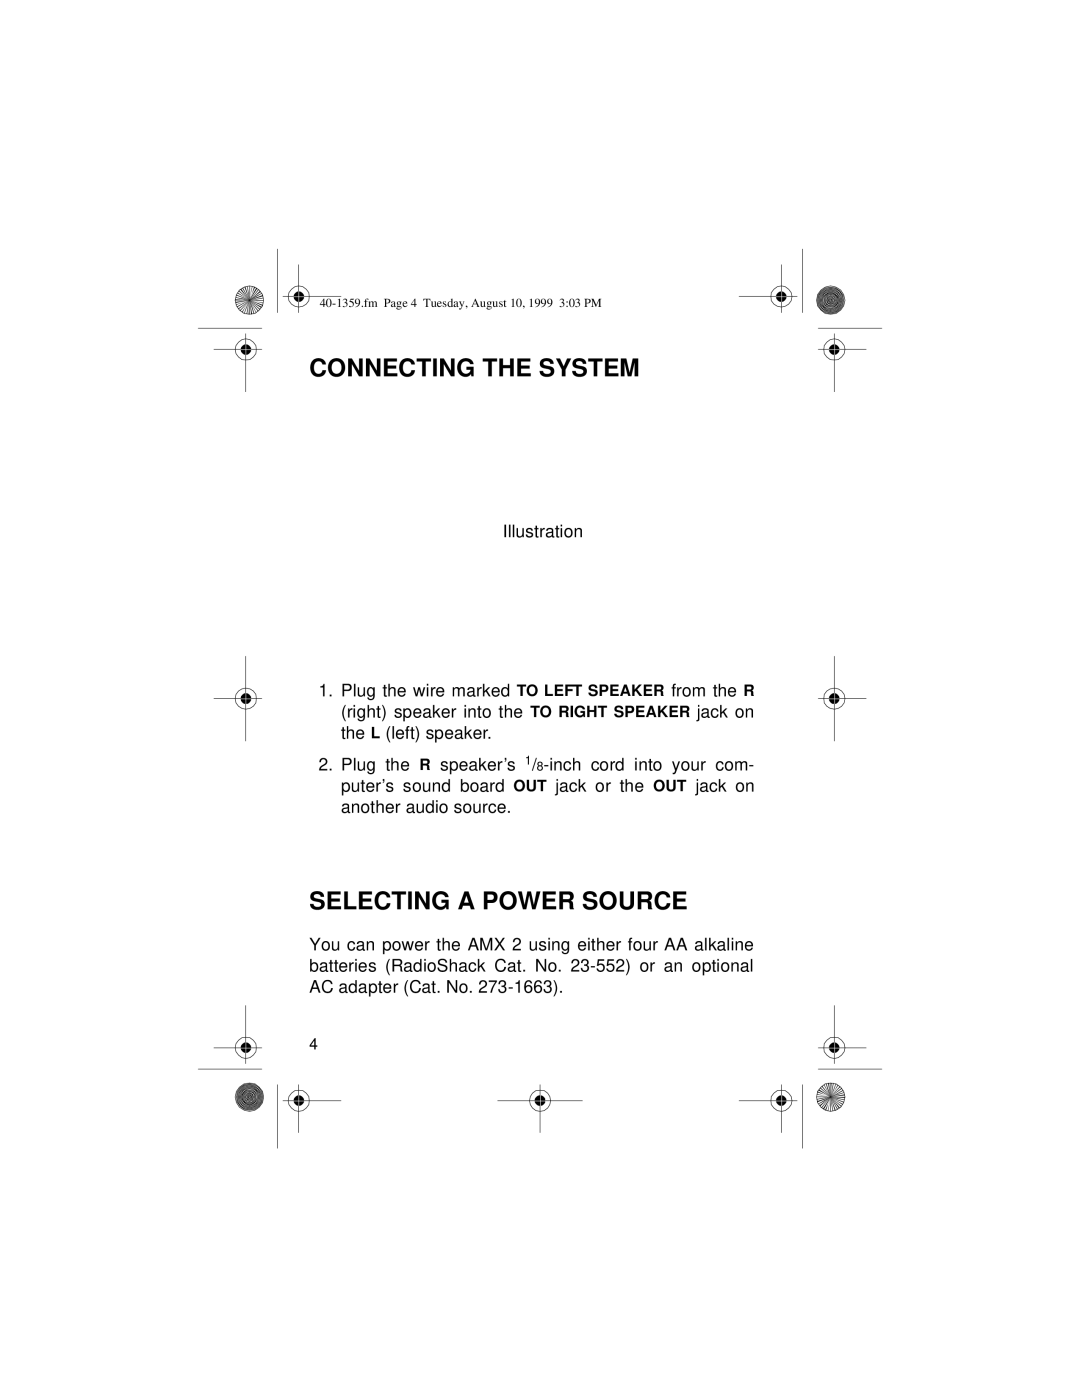 Optimus 40-1359 owner manual Connecting The System, Selecting A Power Source 